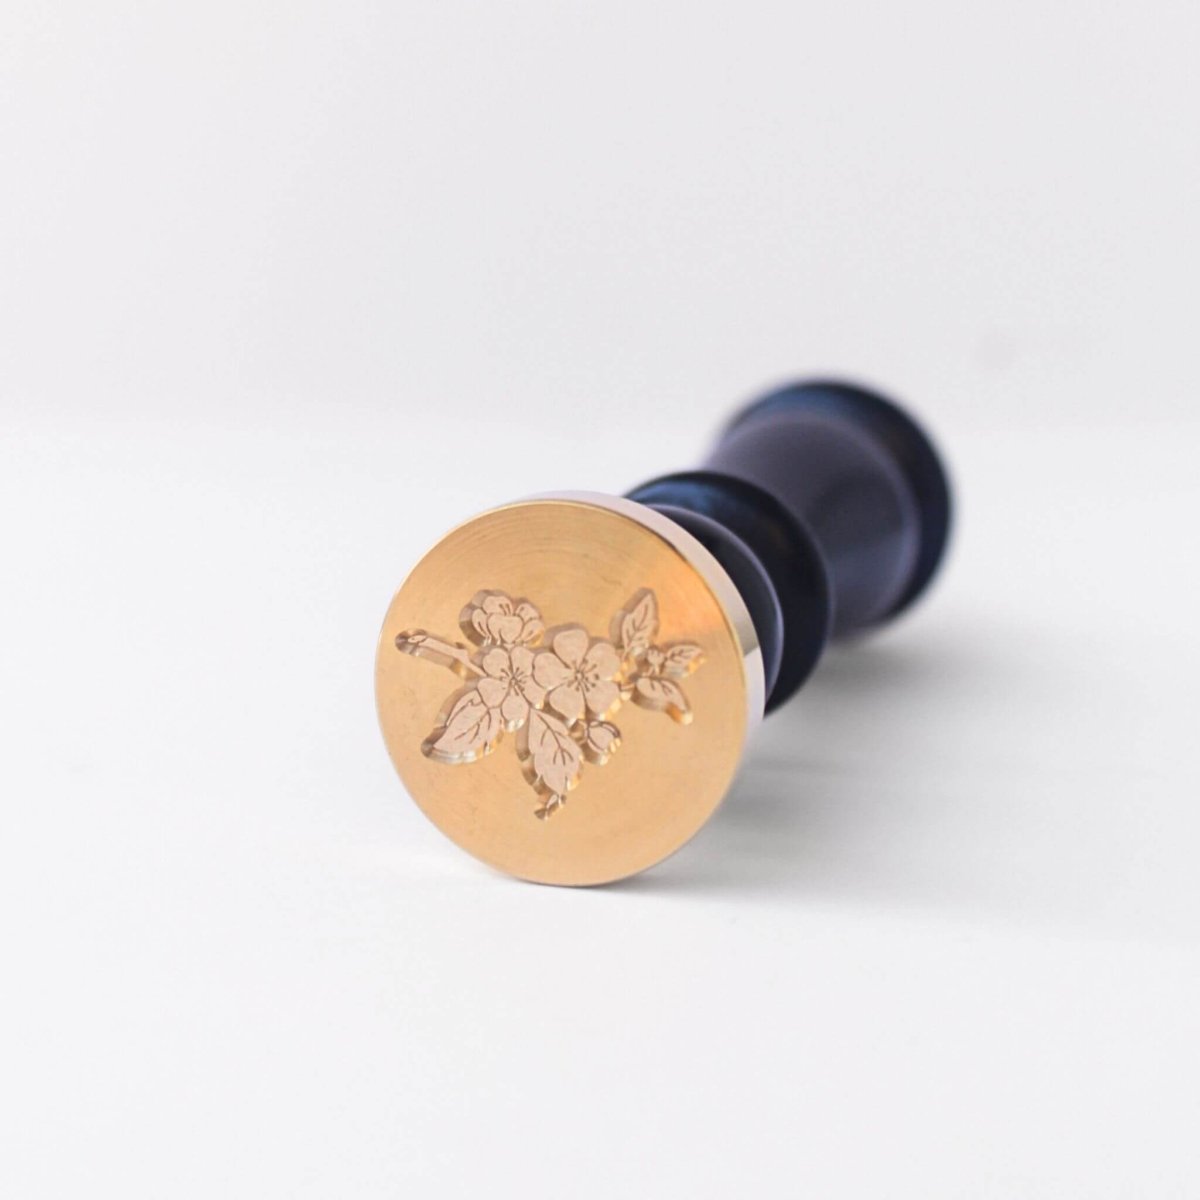 wax seal stamp with flower blossom design